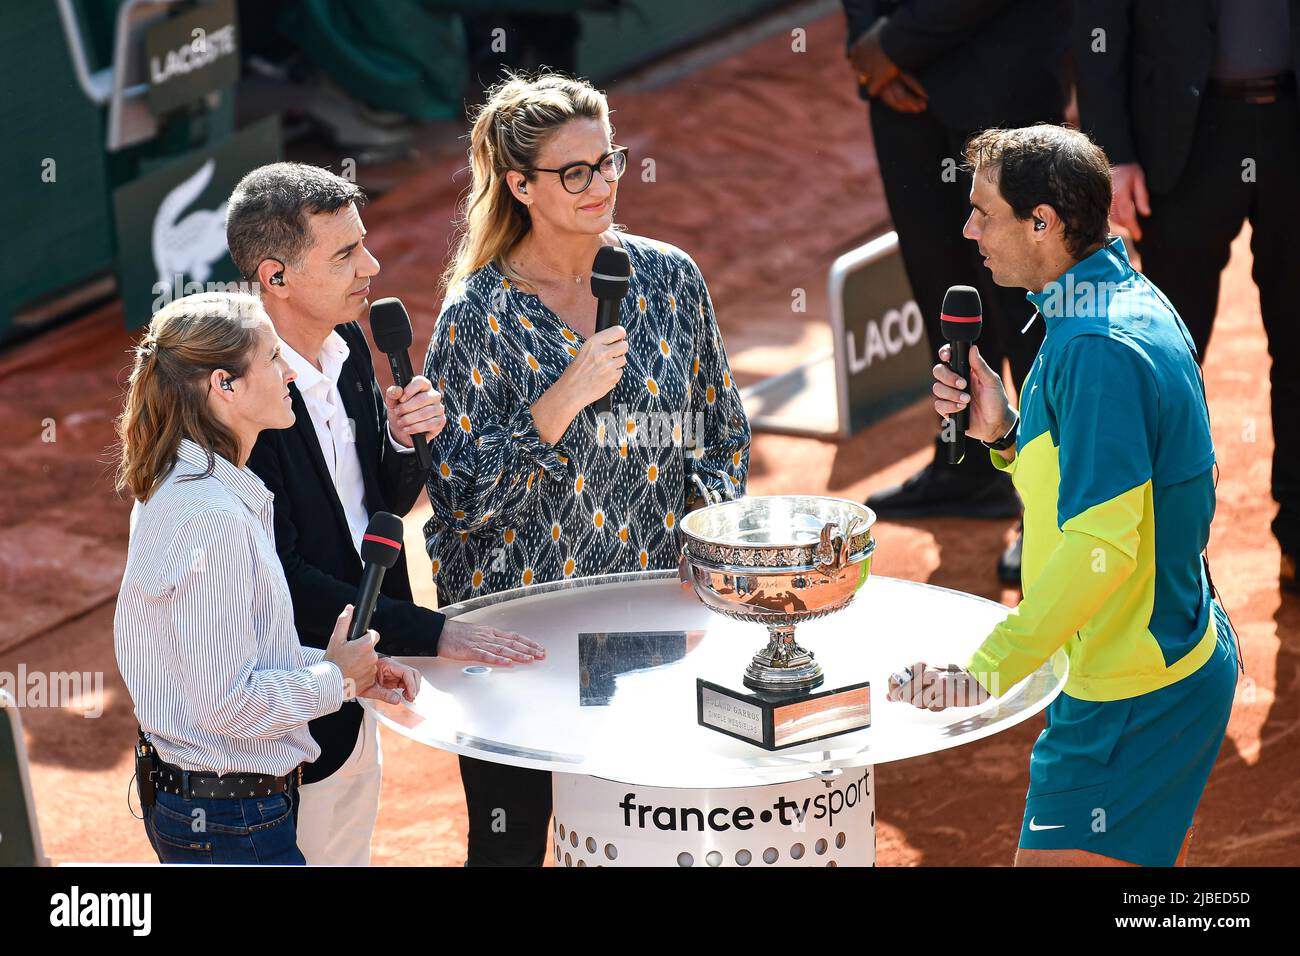 Paris, France - 05/06/2022, Rafael "Rafa" Nadal of Spain with the trophy is  interviewed by the French television channel "France Televisions" ("France  TV Sport", "France 2") with Justine Henin, Laurent Luyat and